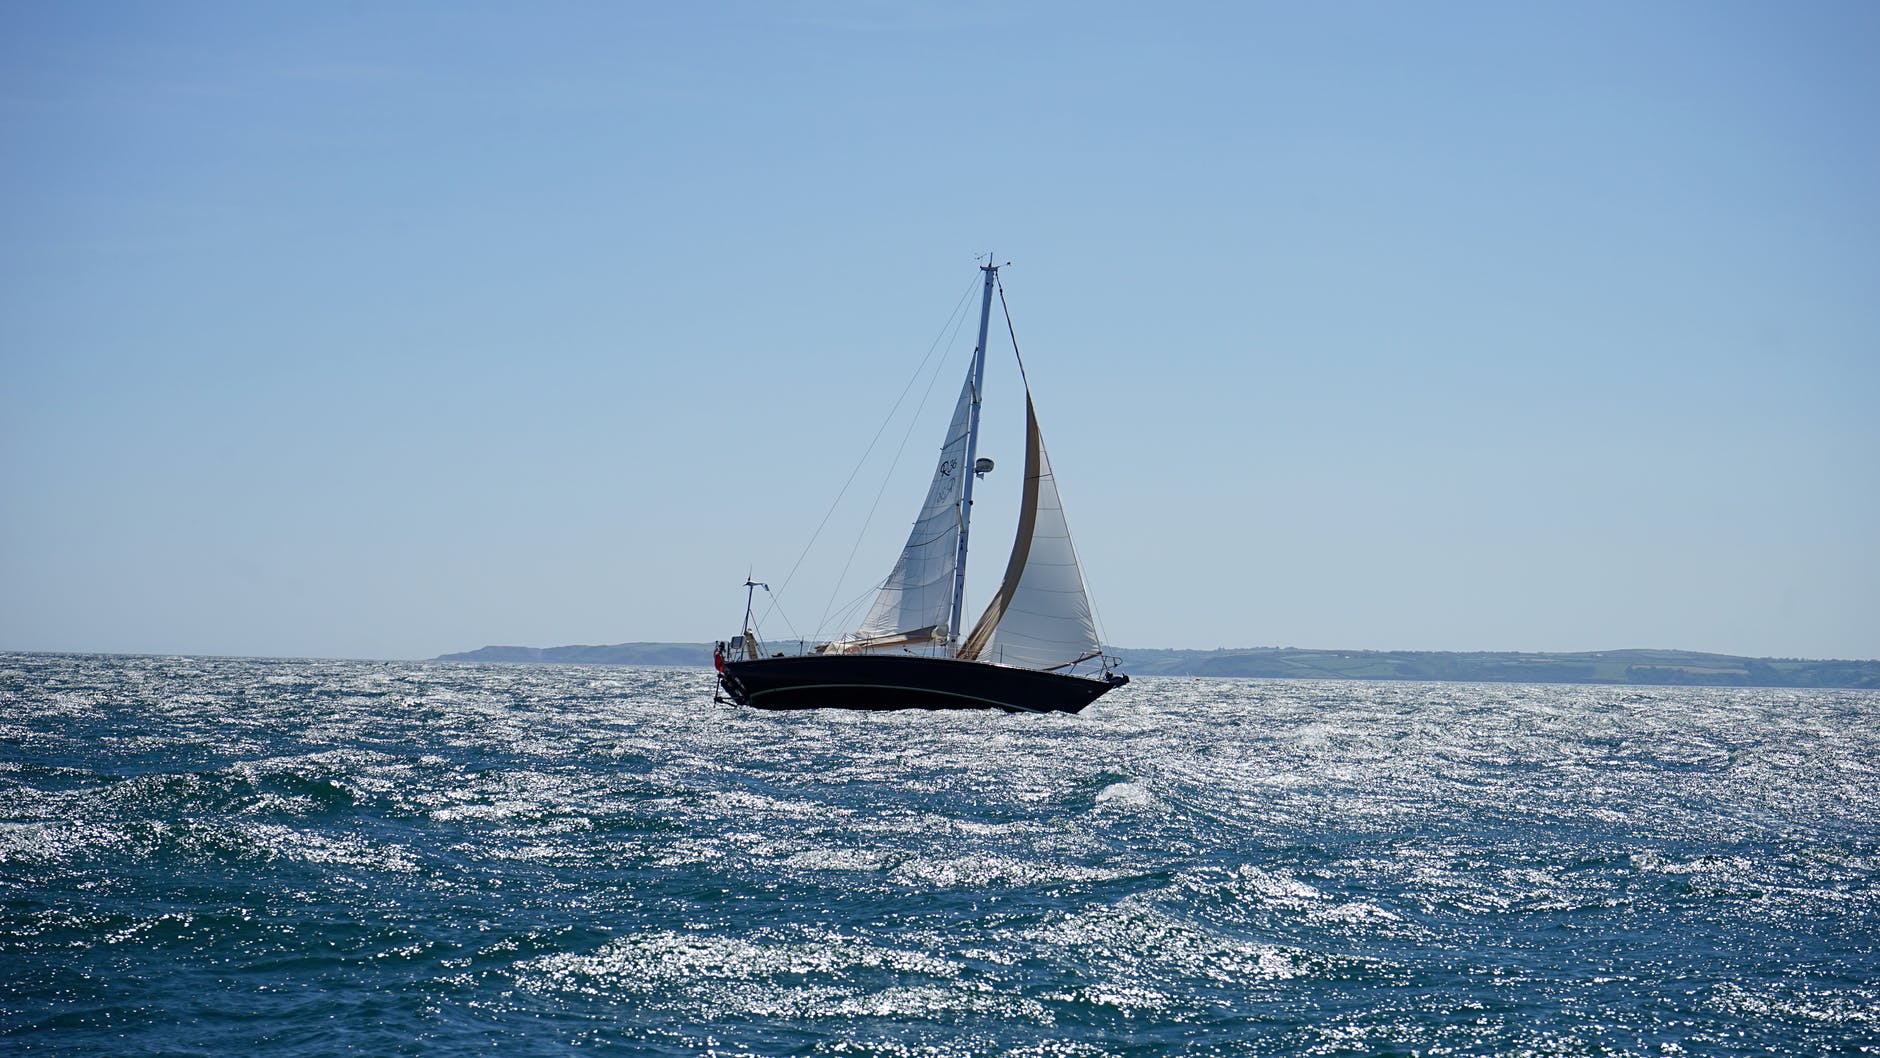 white and black sail boat on ocean